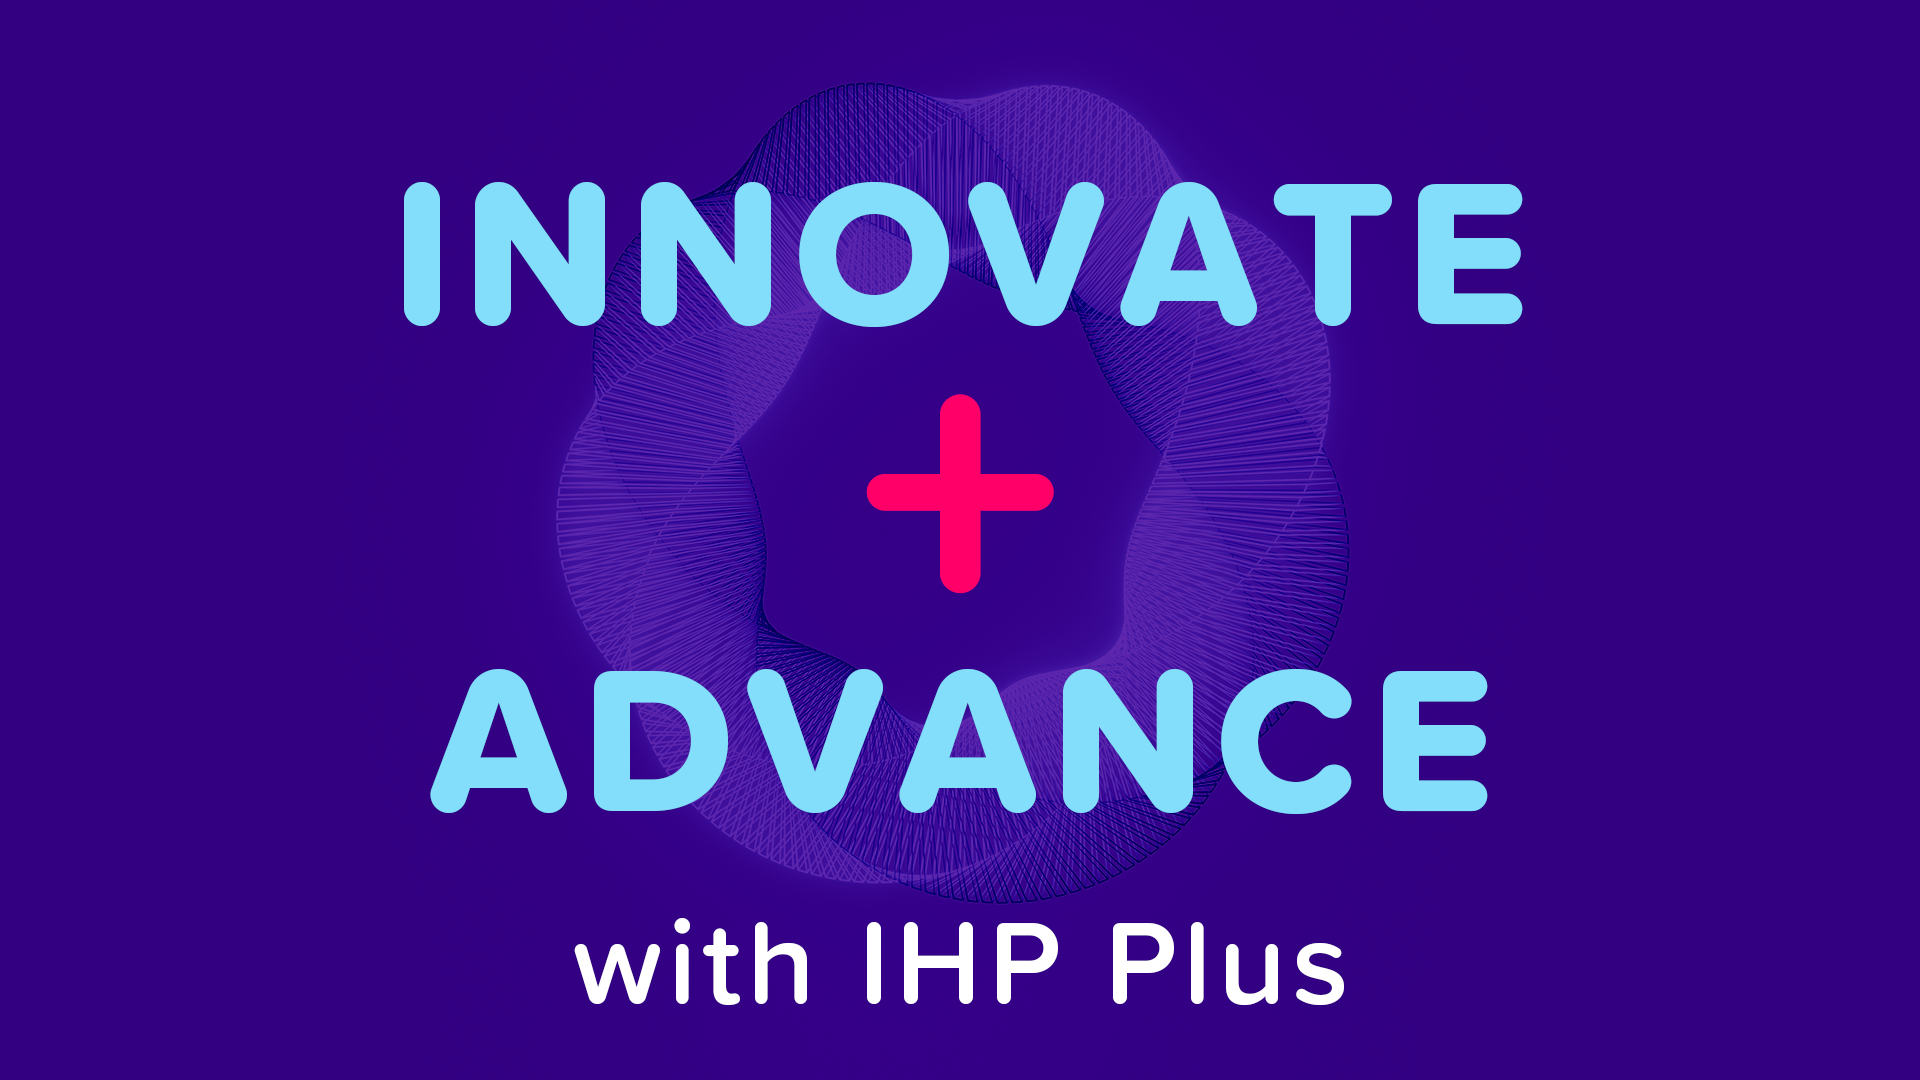 IHP Plus, Open GI, Insurance Software, mga software solutions, insurance, brokers,